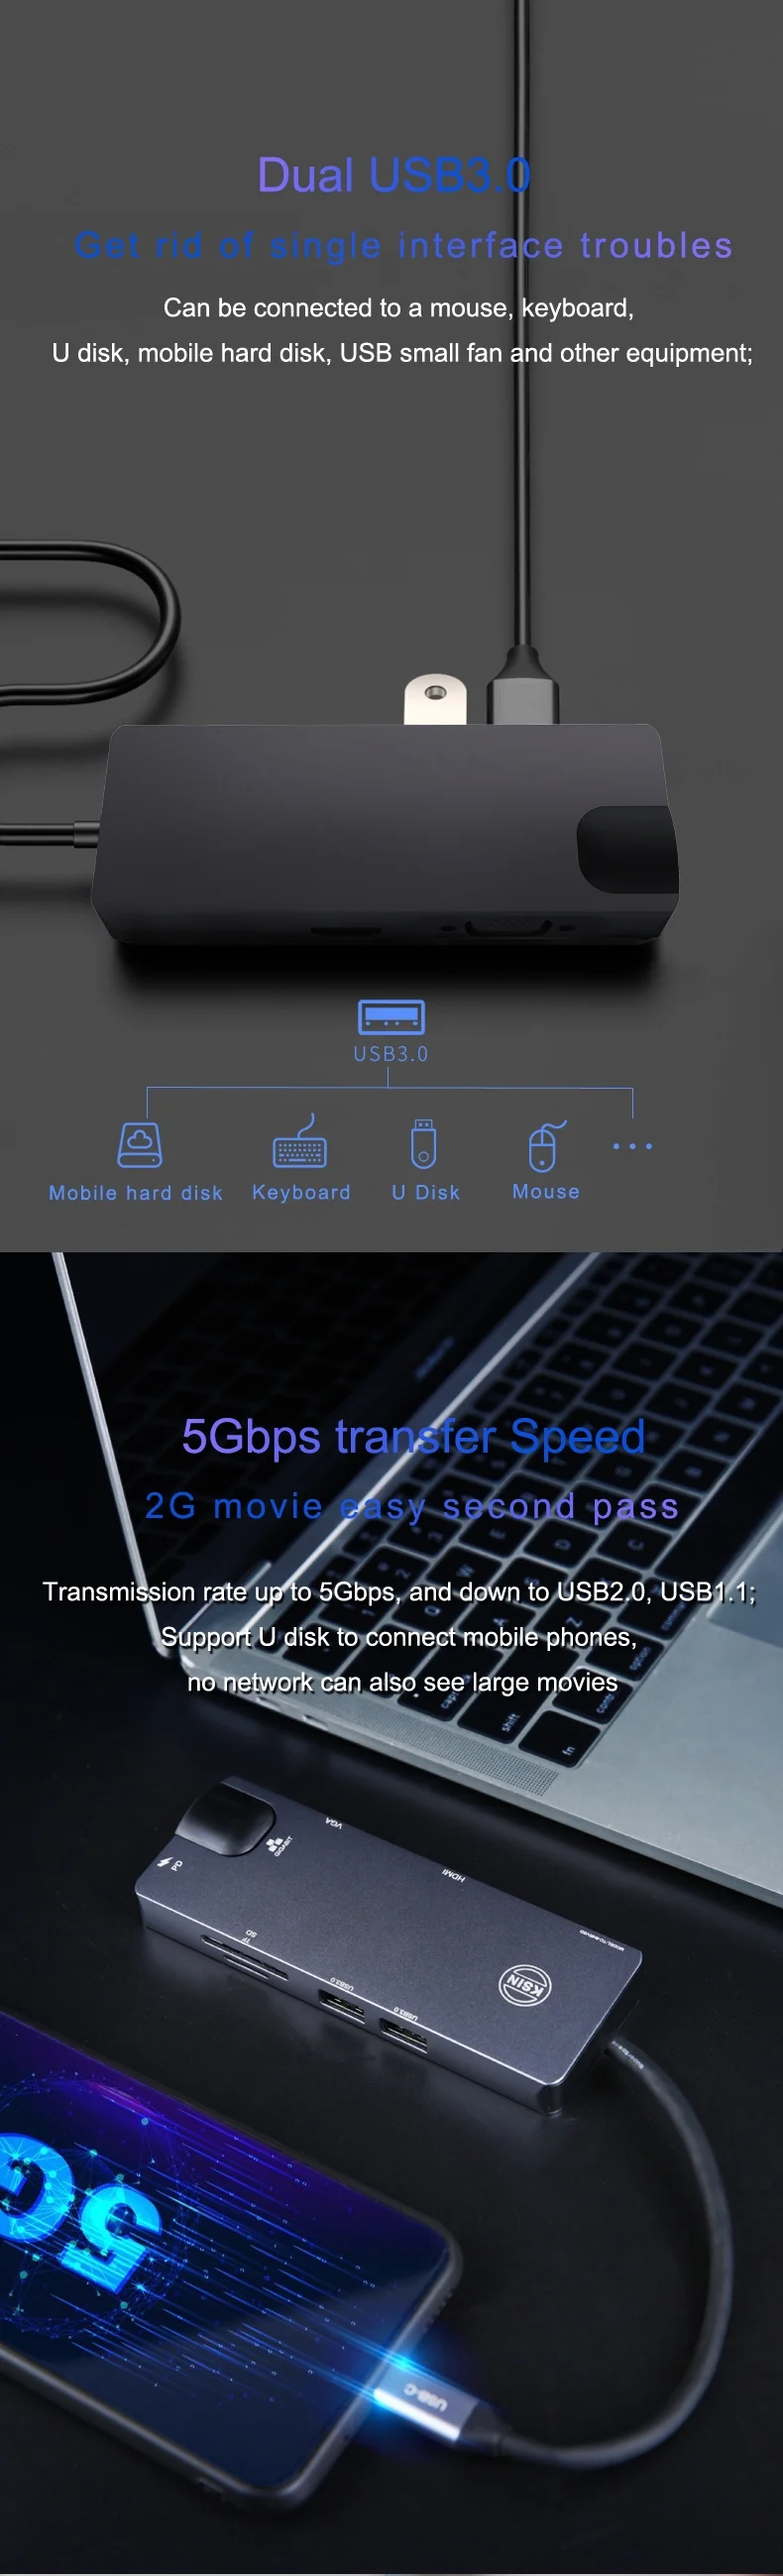 Newest Usb type c hub 8 in 1 usb hub multi function adapter for MacBook Pro and Type C Windows Laptops